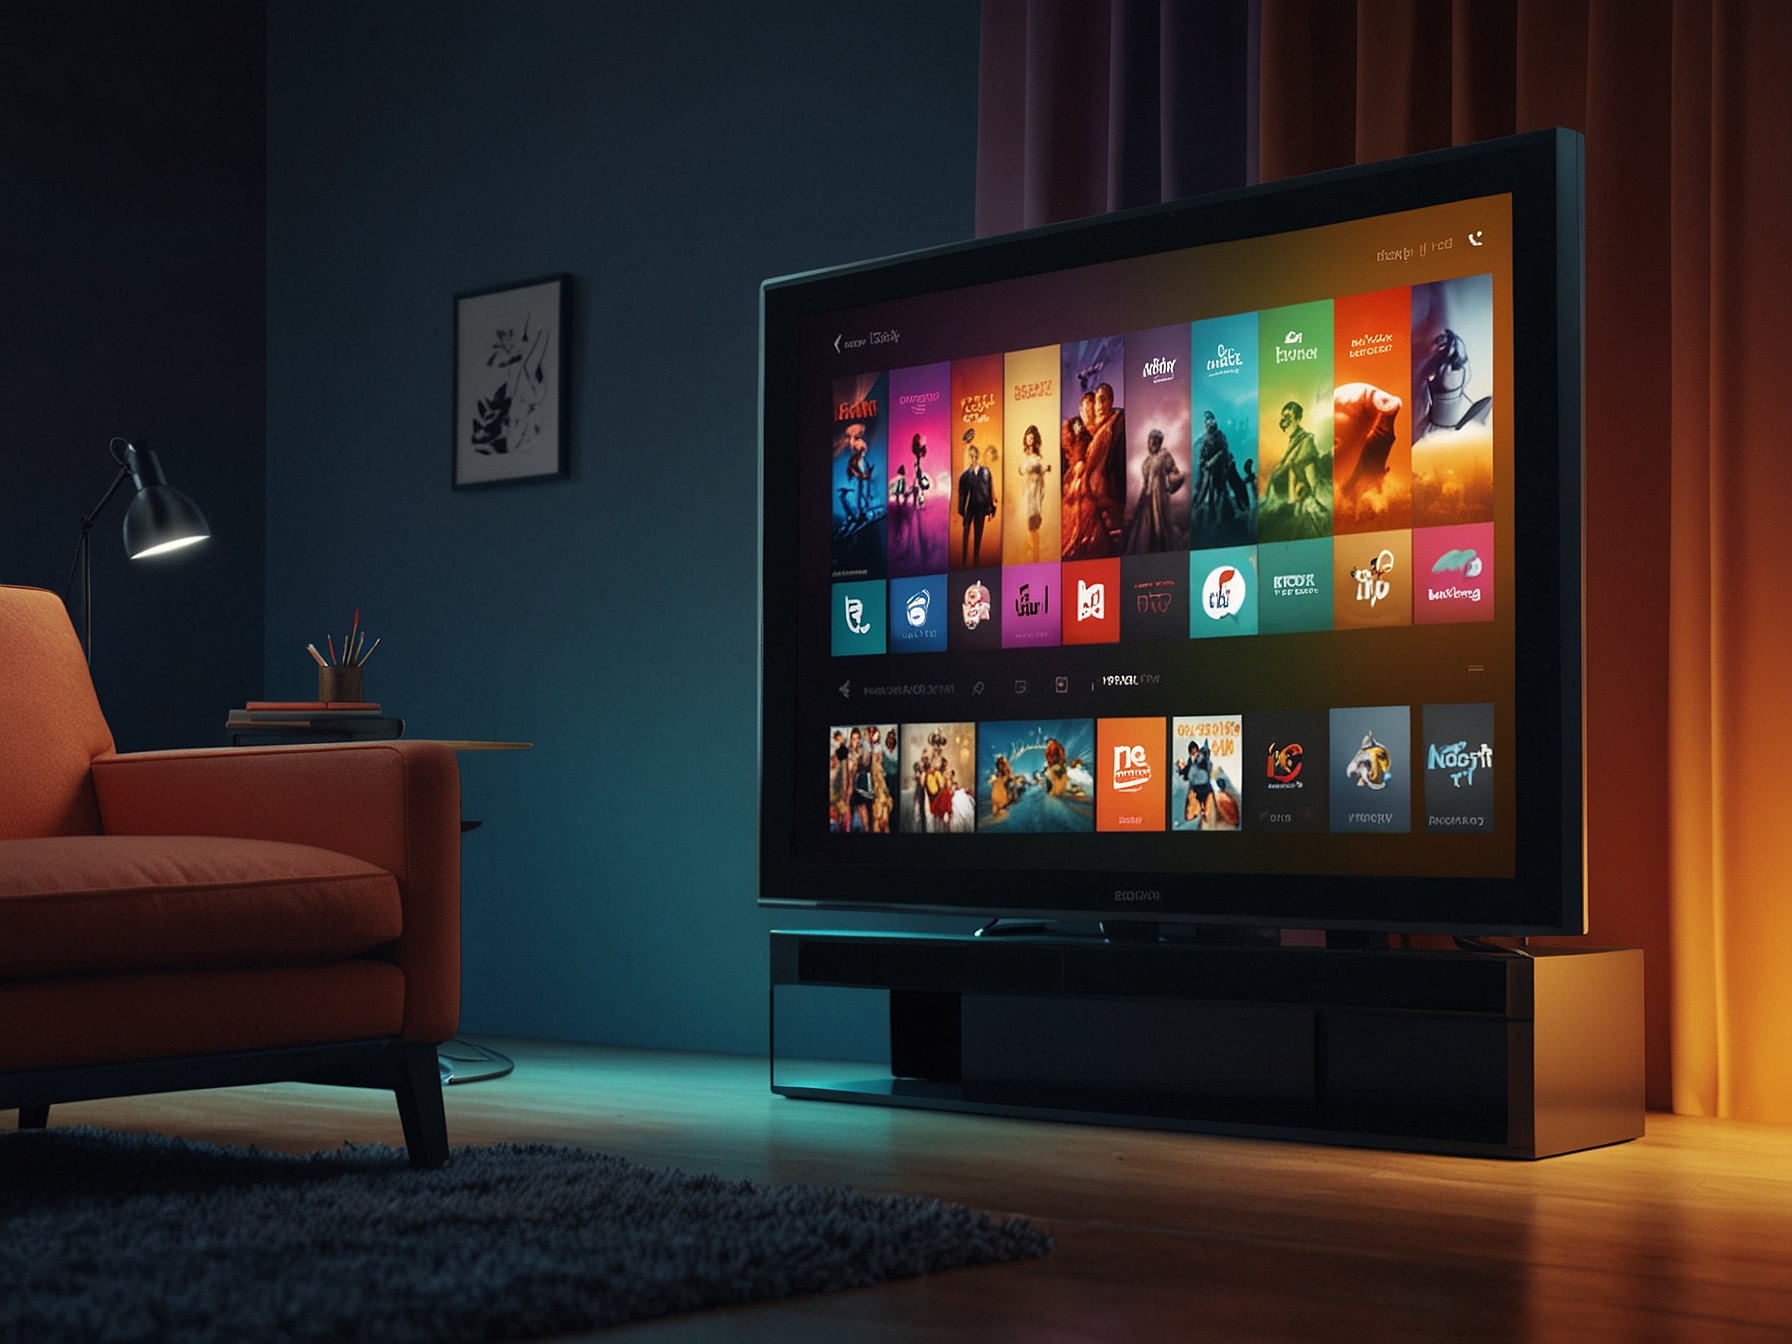 An old television set displaying vibrant, modern streaming service interfaces after being upgraded with an Amazon Fire TV Stick 4K, showcasing its transformative capabilities.